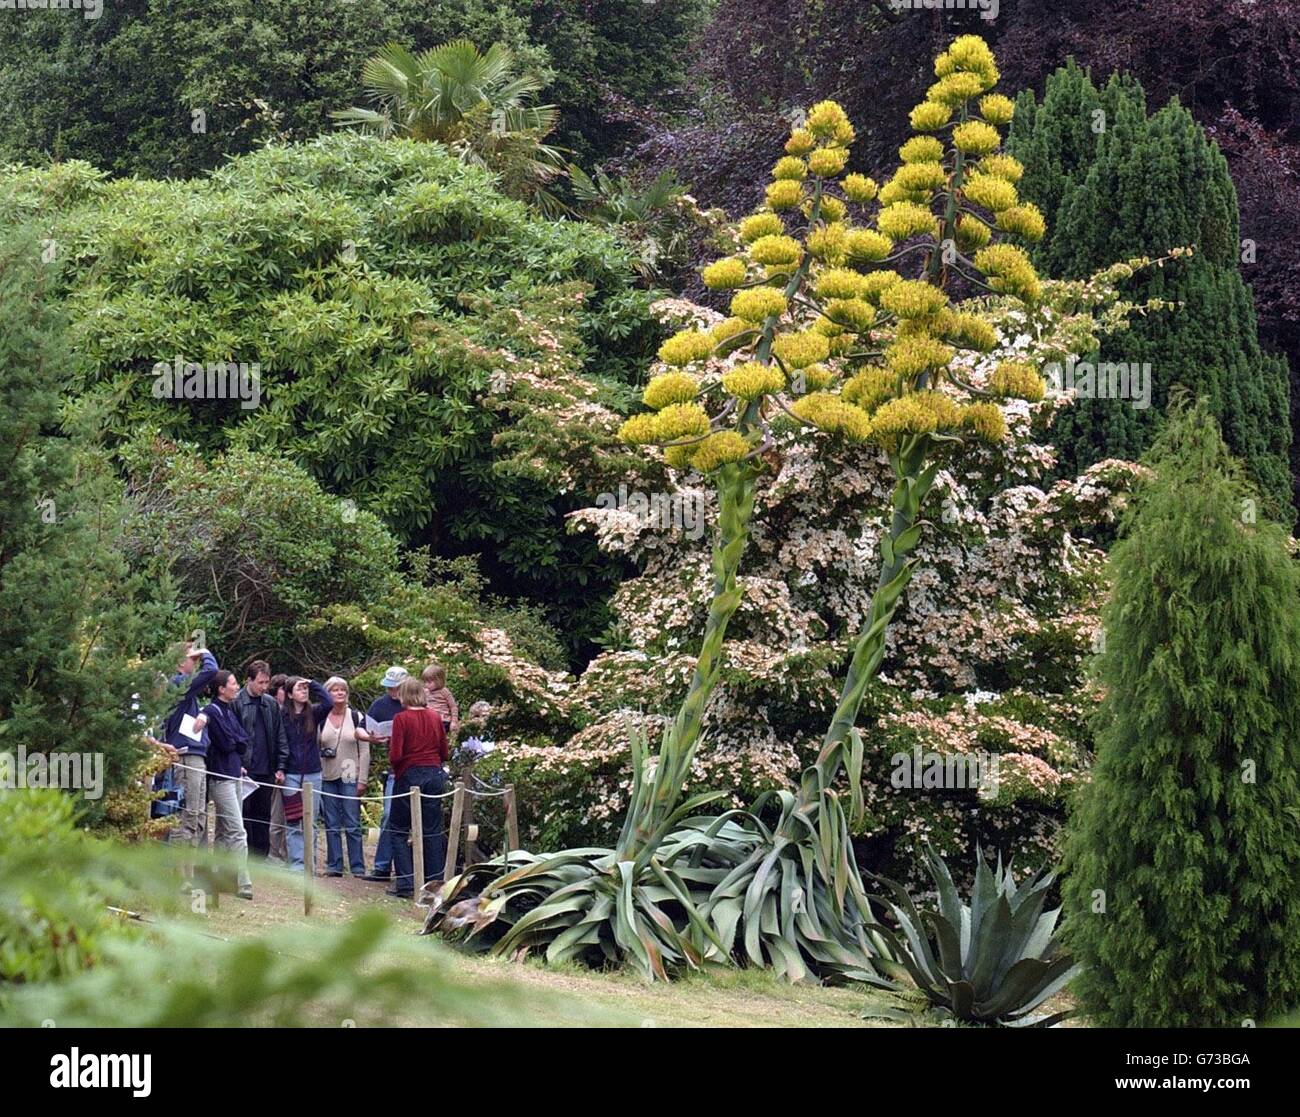 Visitors examine, the two giant agave plants - commonly known as 'century plants' for the age that they can reach before they flower - which came bloomed for the first time in nearly 30 years at the National Trust's Glendurgan Gardens in Cornwall. The plants, which are nearly 30-foot-high and are native to Mexico and parts of America, are in what is usually a private area of the 26-acre, 19th century garden but proving so popular that a special enclosure has been provided for people to get close to them.They are thought to have grown from seed from the last agave which flowered back in 1976. Stock Photo